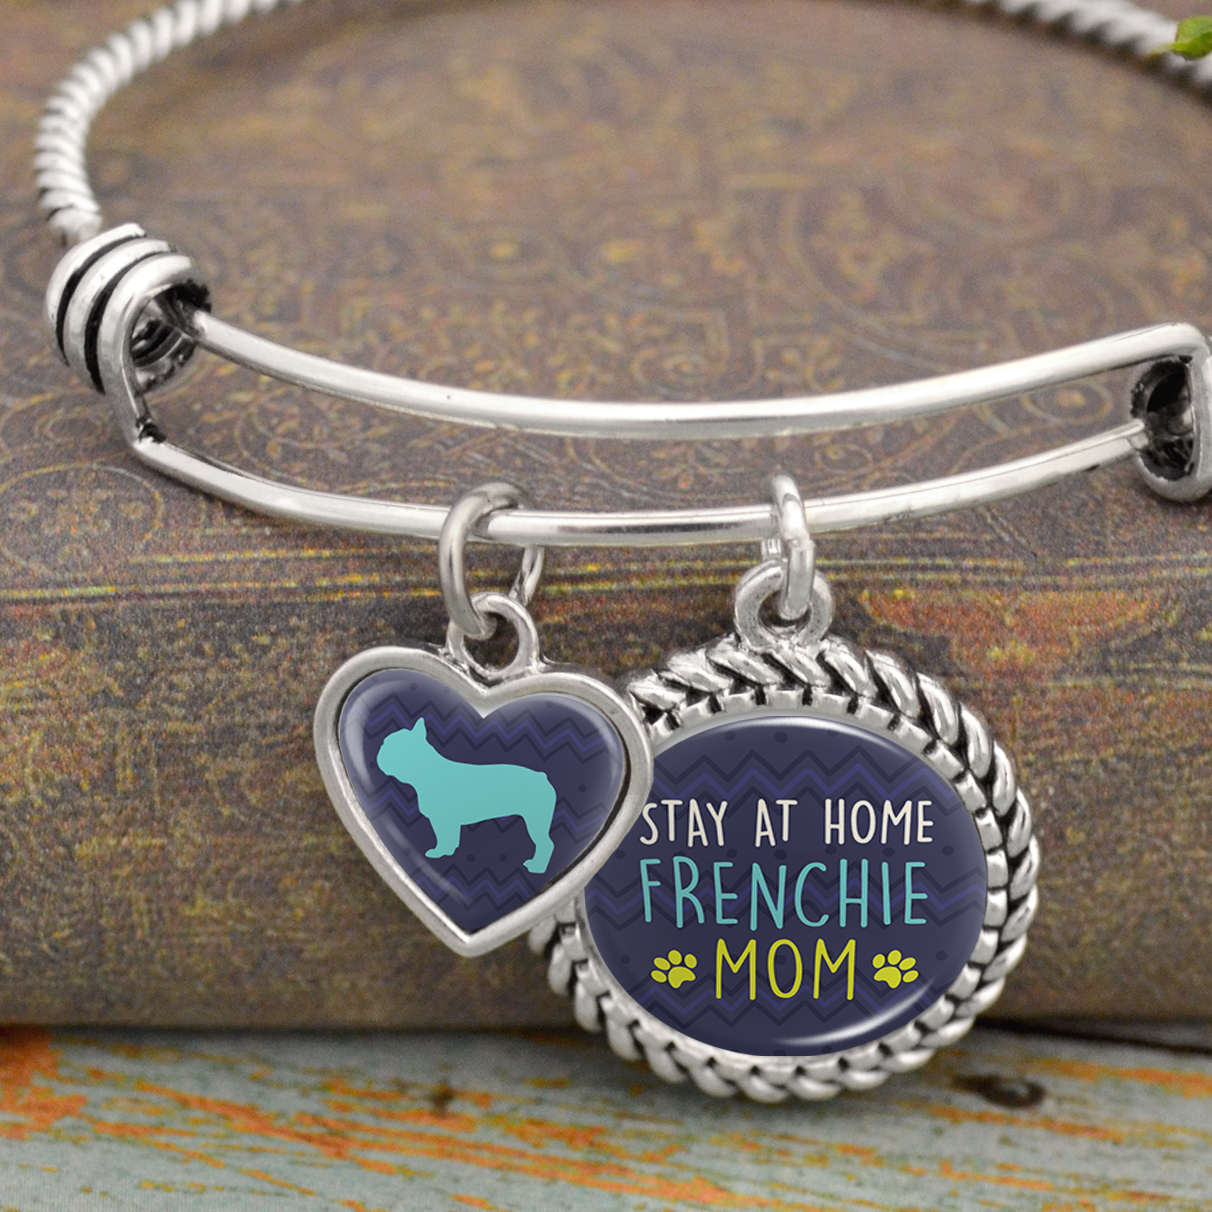 Stay At Home Frenchie Mom Charm Bracelet